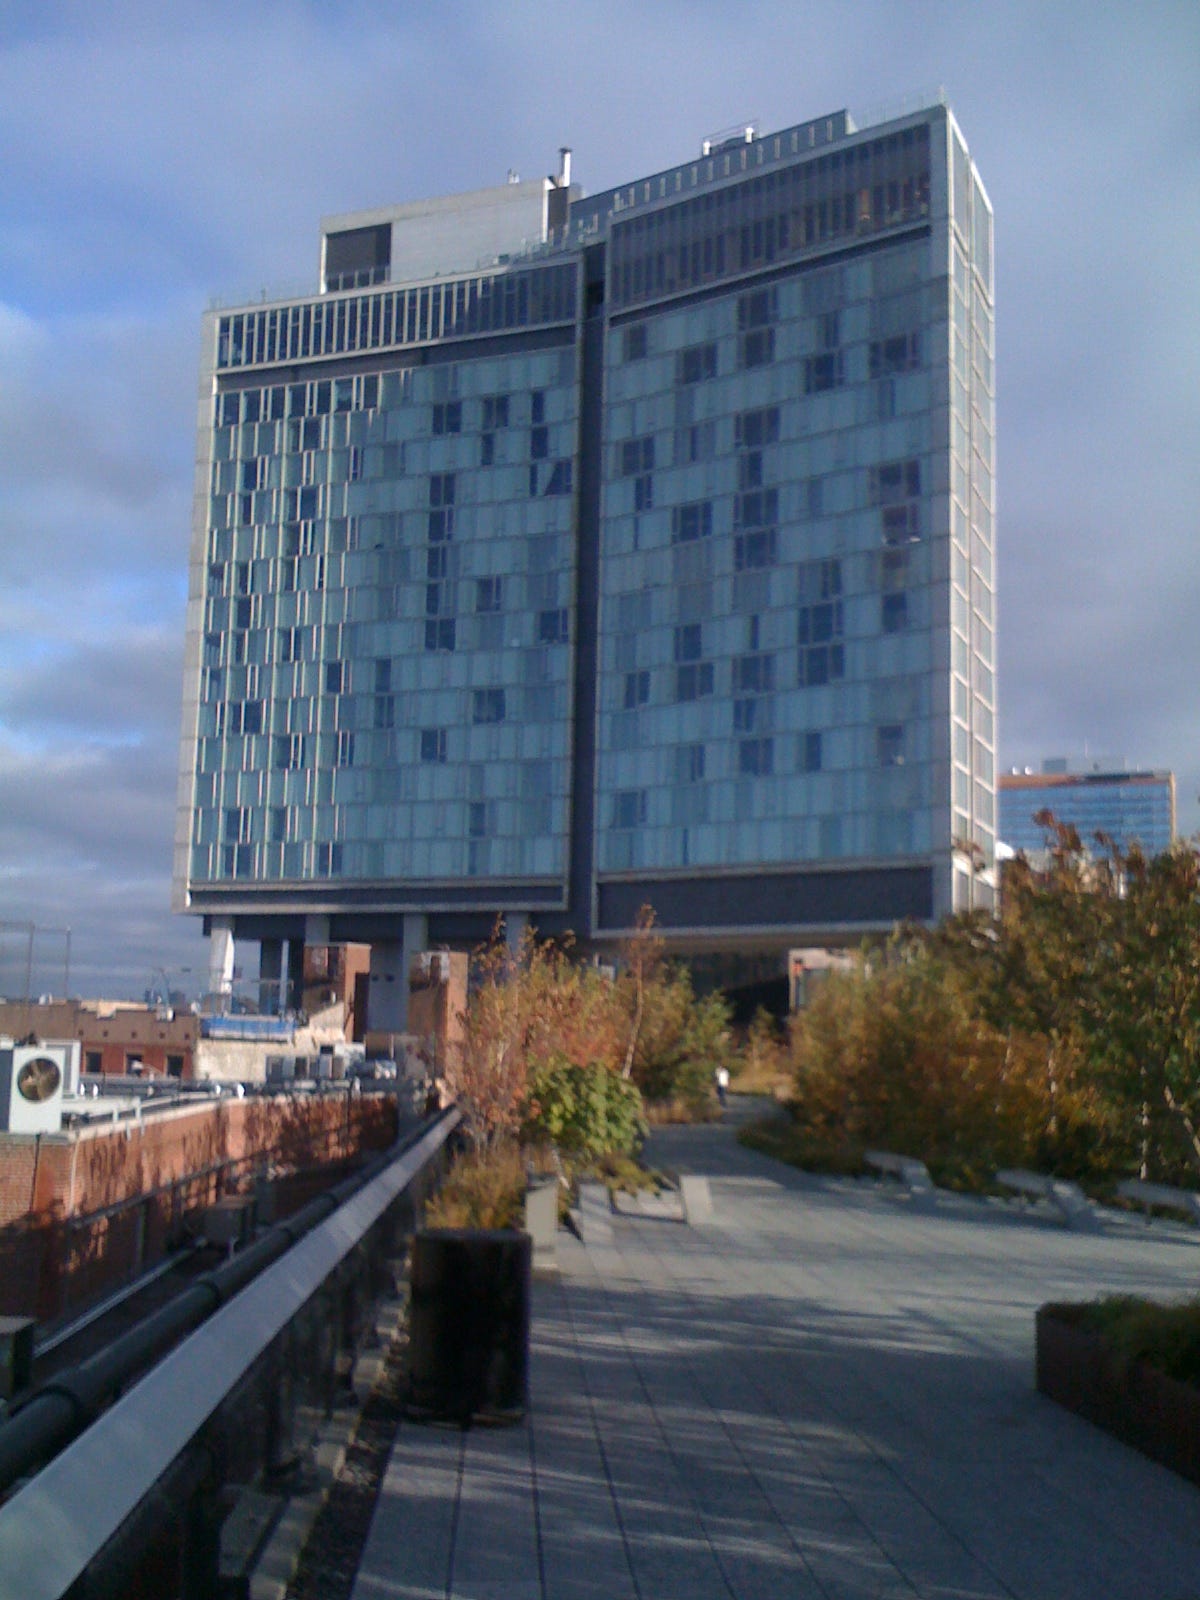 The Standard Hotel on pillars above the High Line Park in New York City